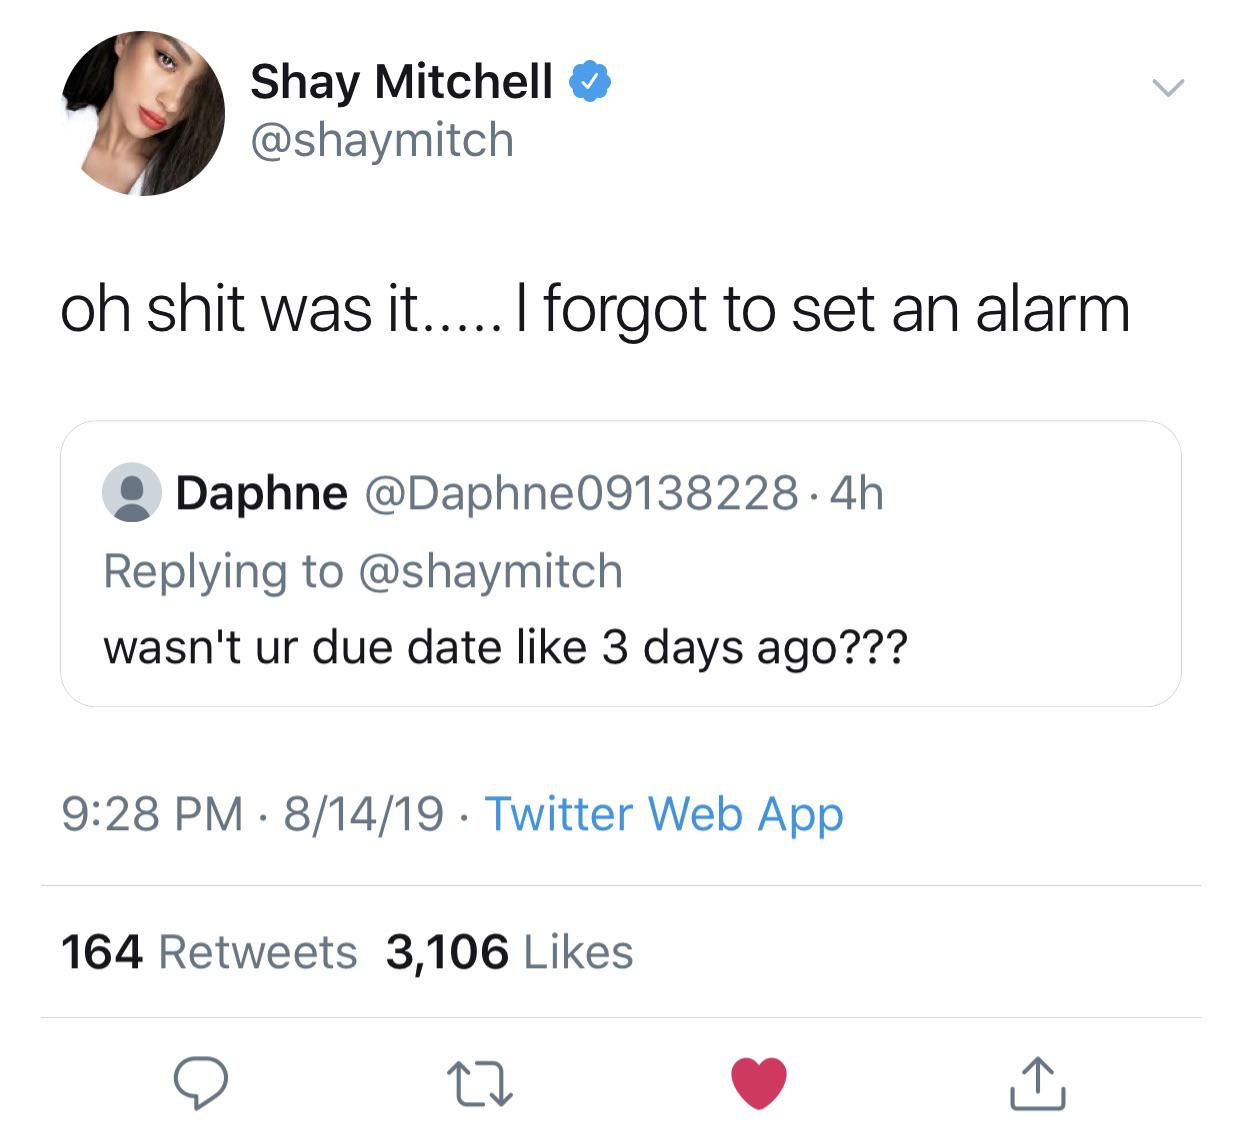 number - Shay Mitchell oh shit was it..... I forgot to set an alarm Daphne .4h. wasn't ur due date 3 days ago??? 81419 Twitter Web App 164 3,106